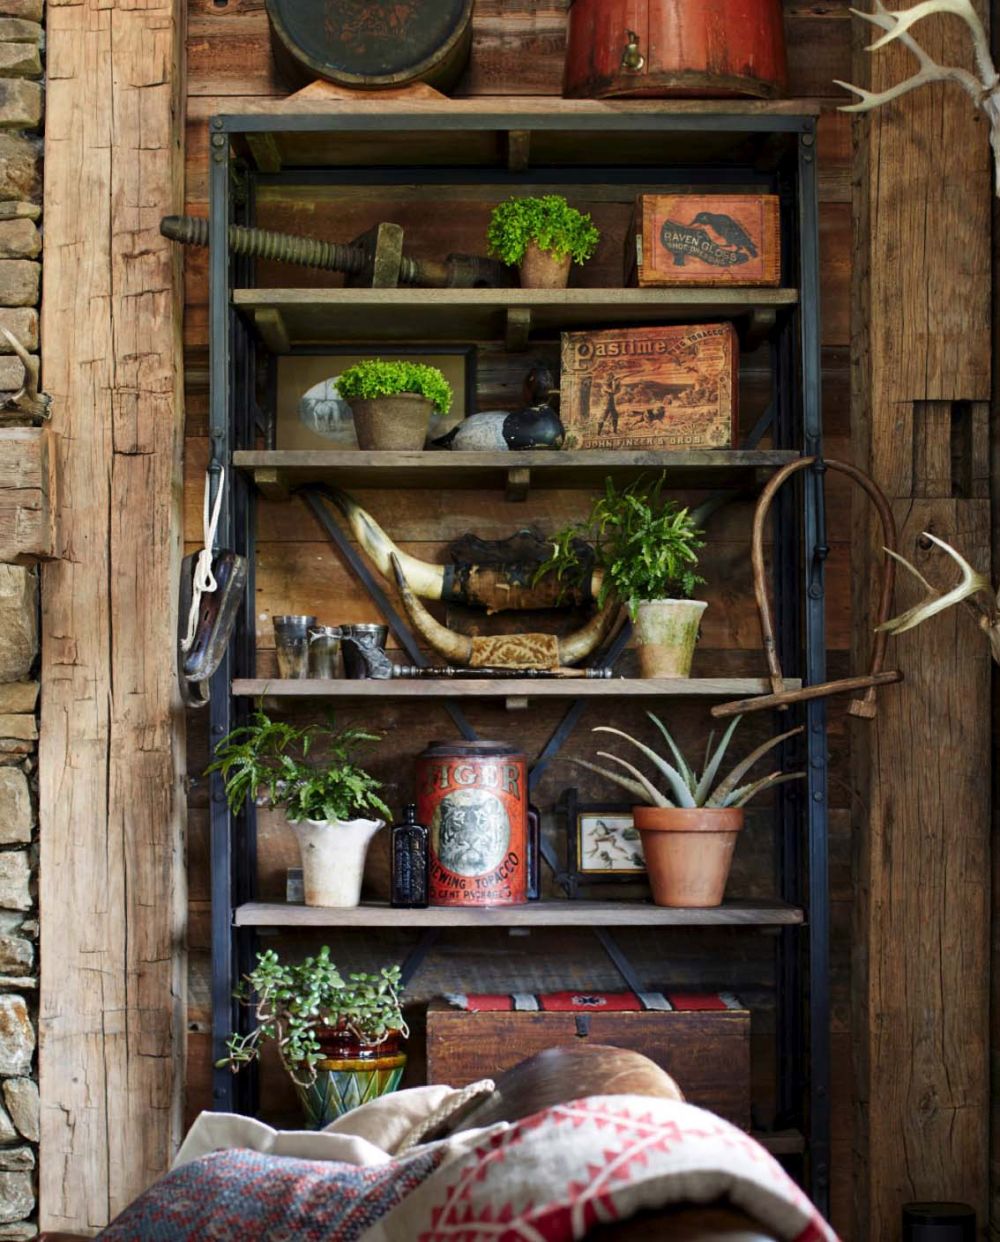 Vintage furniture and antiques are spread throughout the house, creating an authentic rustic interior design